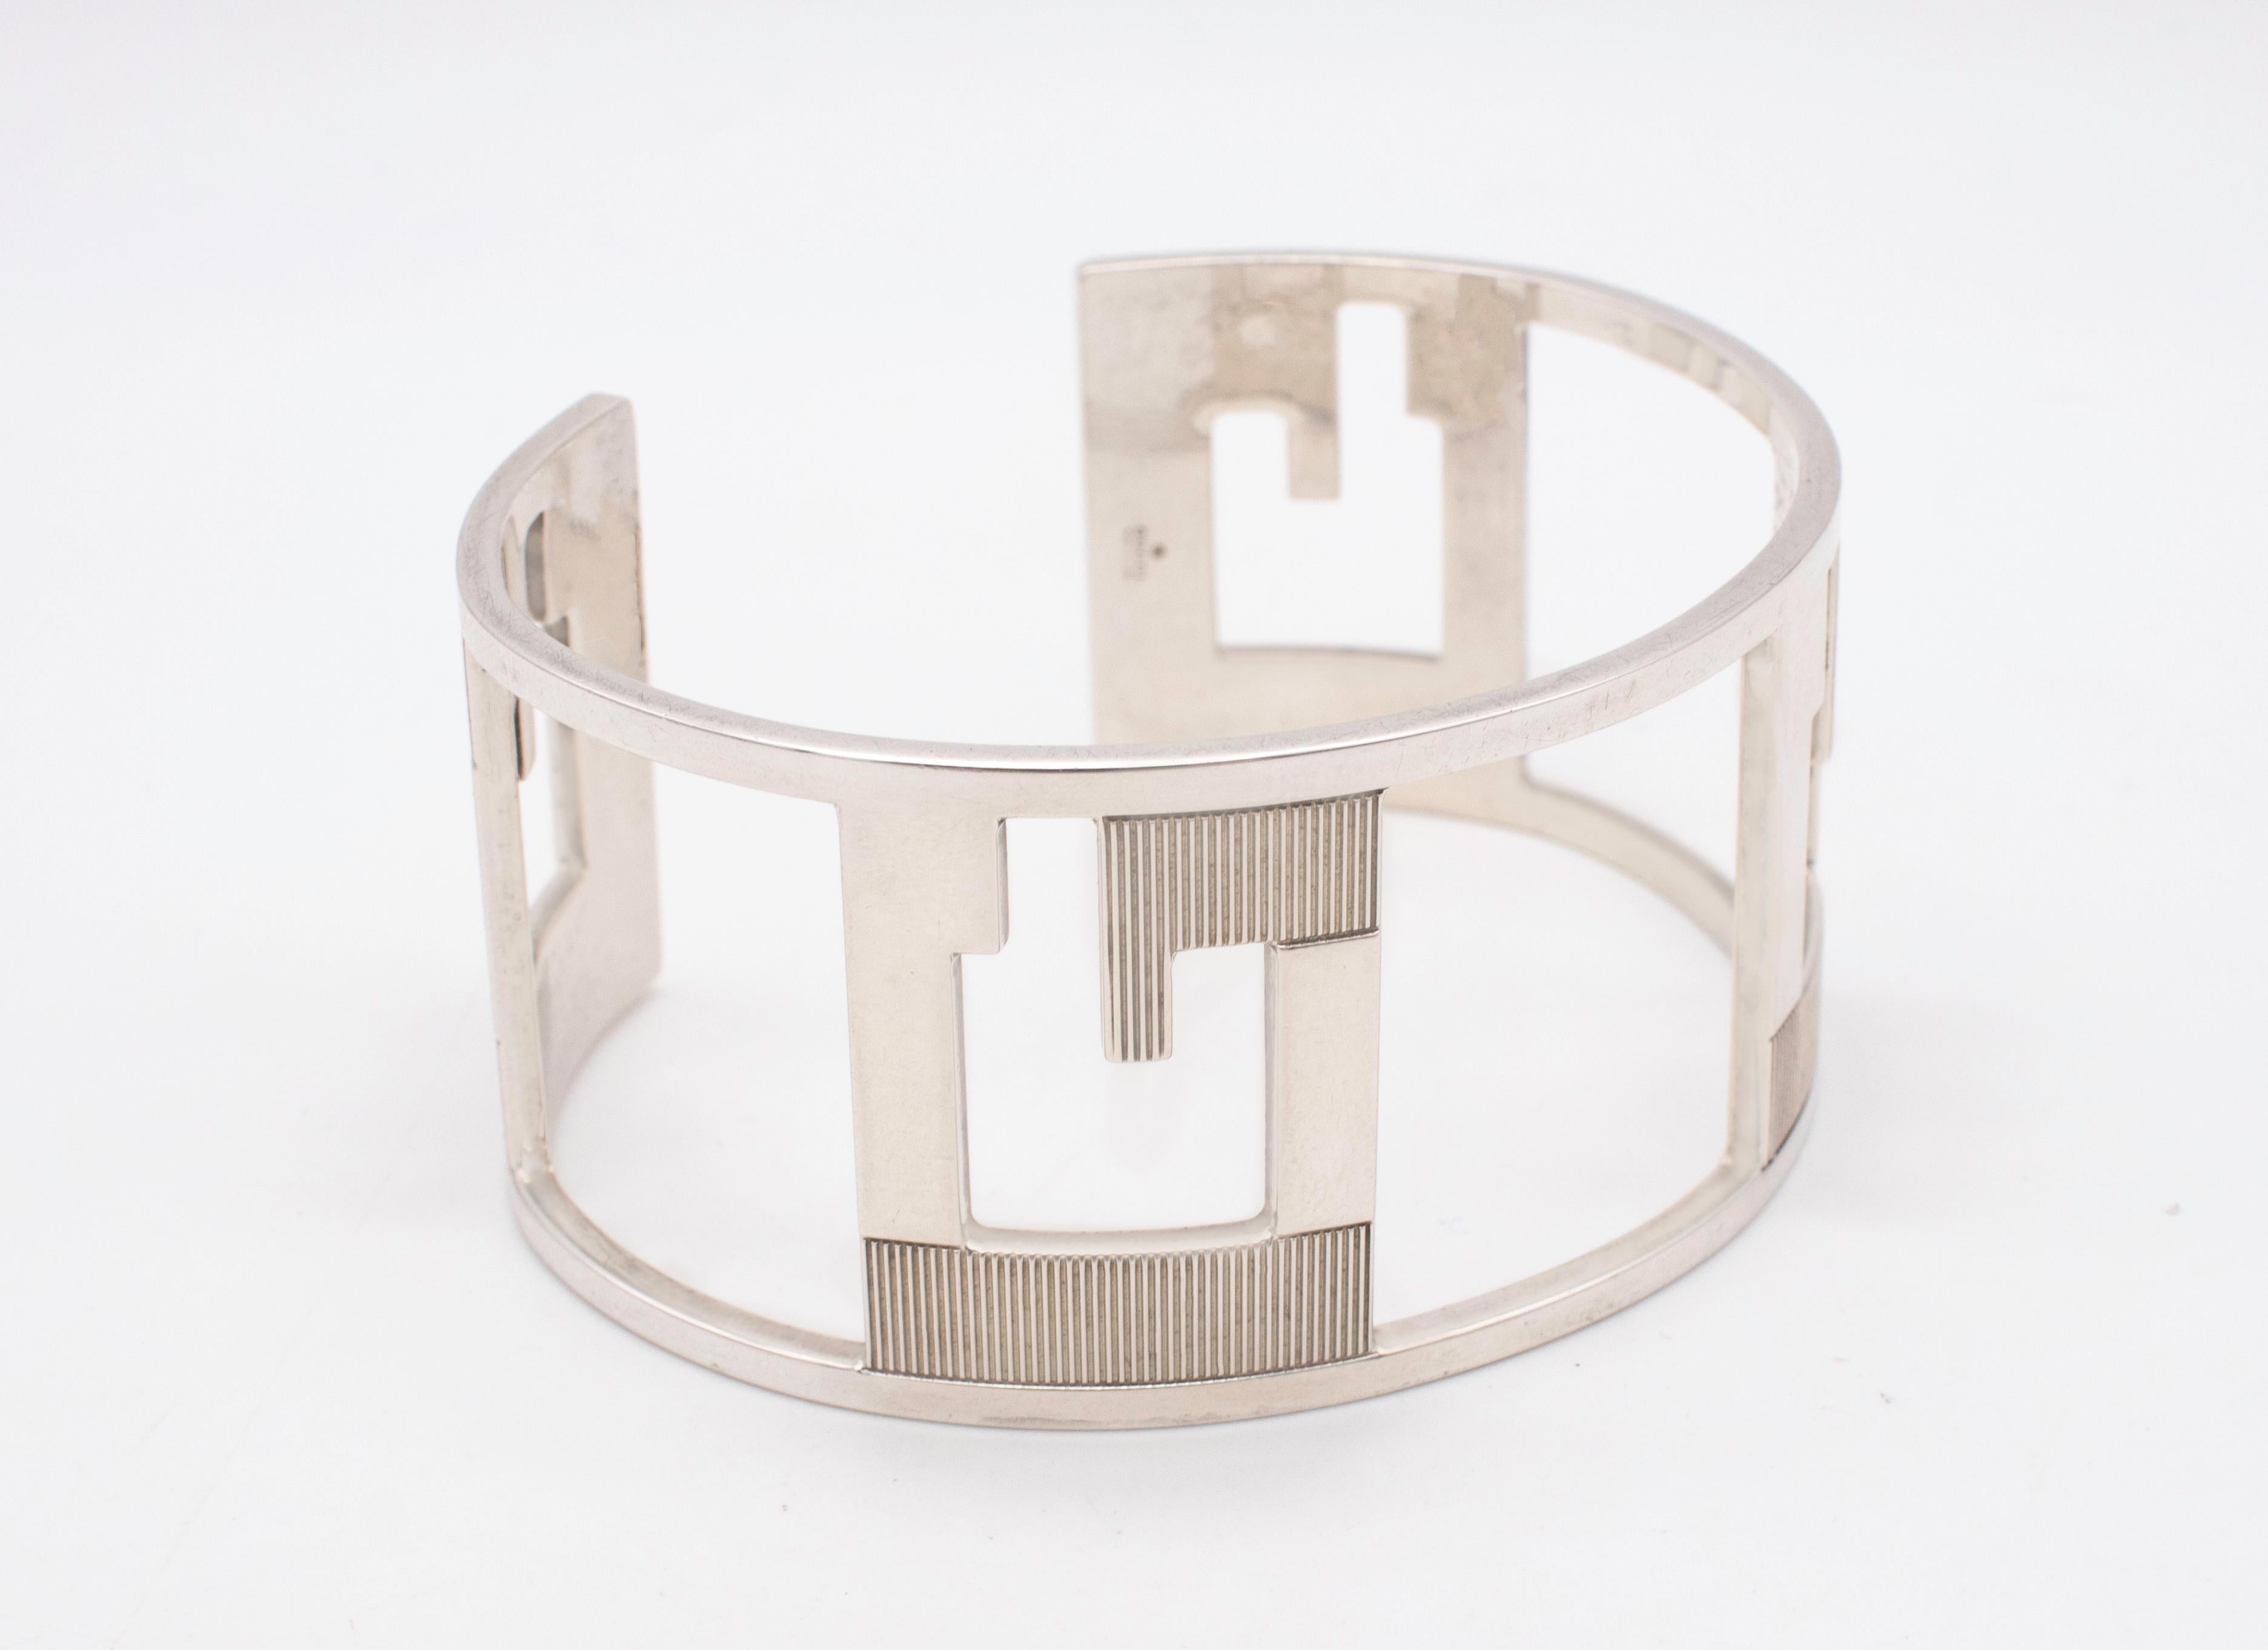 Gucci Firenze Geometric G Logo Cuff Bracelet in Solid .925 Sterling Silver In Excellent Condition For Sale In Miami, FL